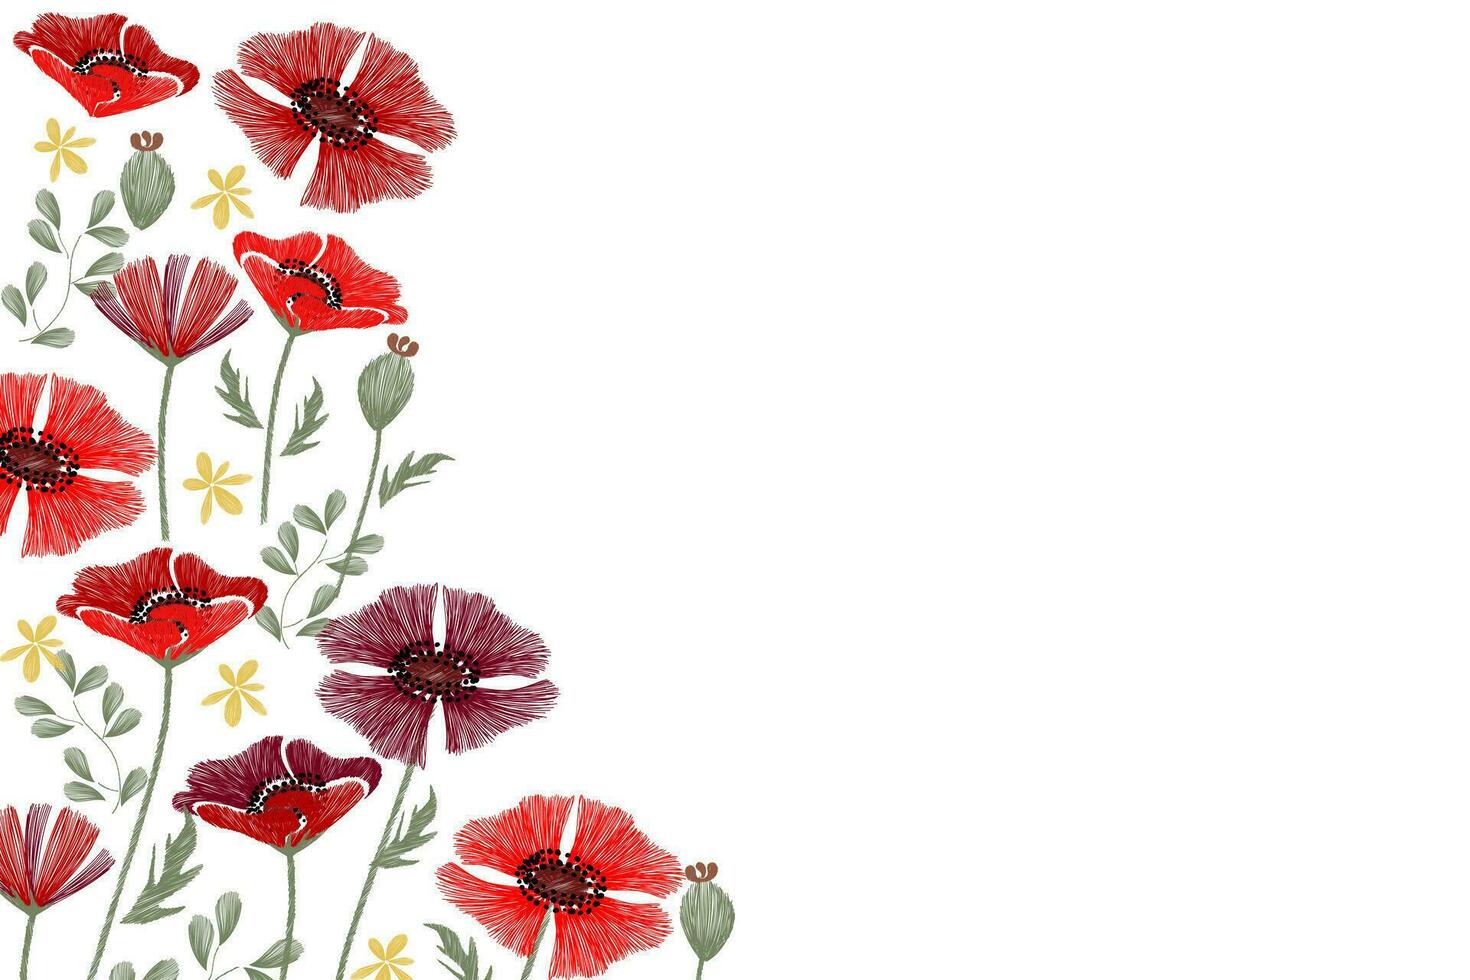 Poppy flowers background for Remembrance Day Memorial Day vector